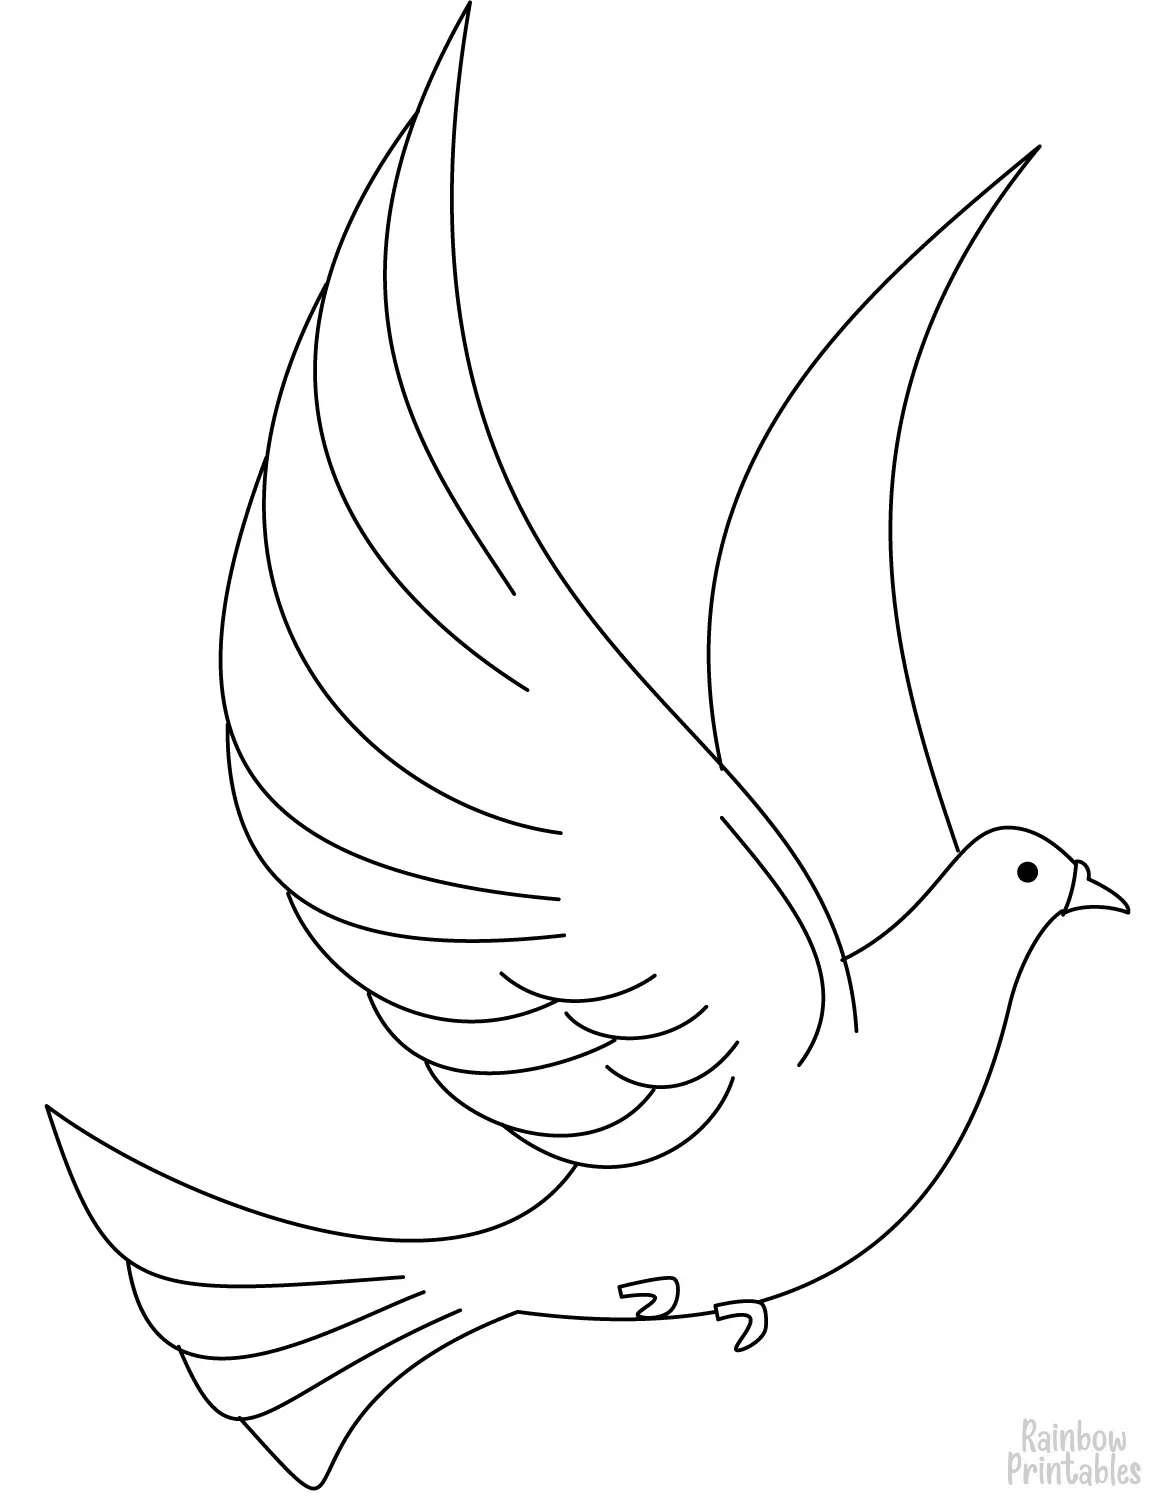 Easy-Simple-flying-dove-coloring-page-activities-for-kids